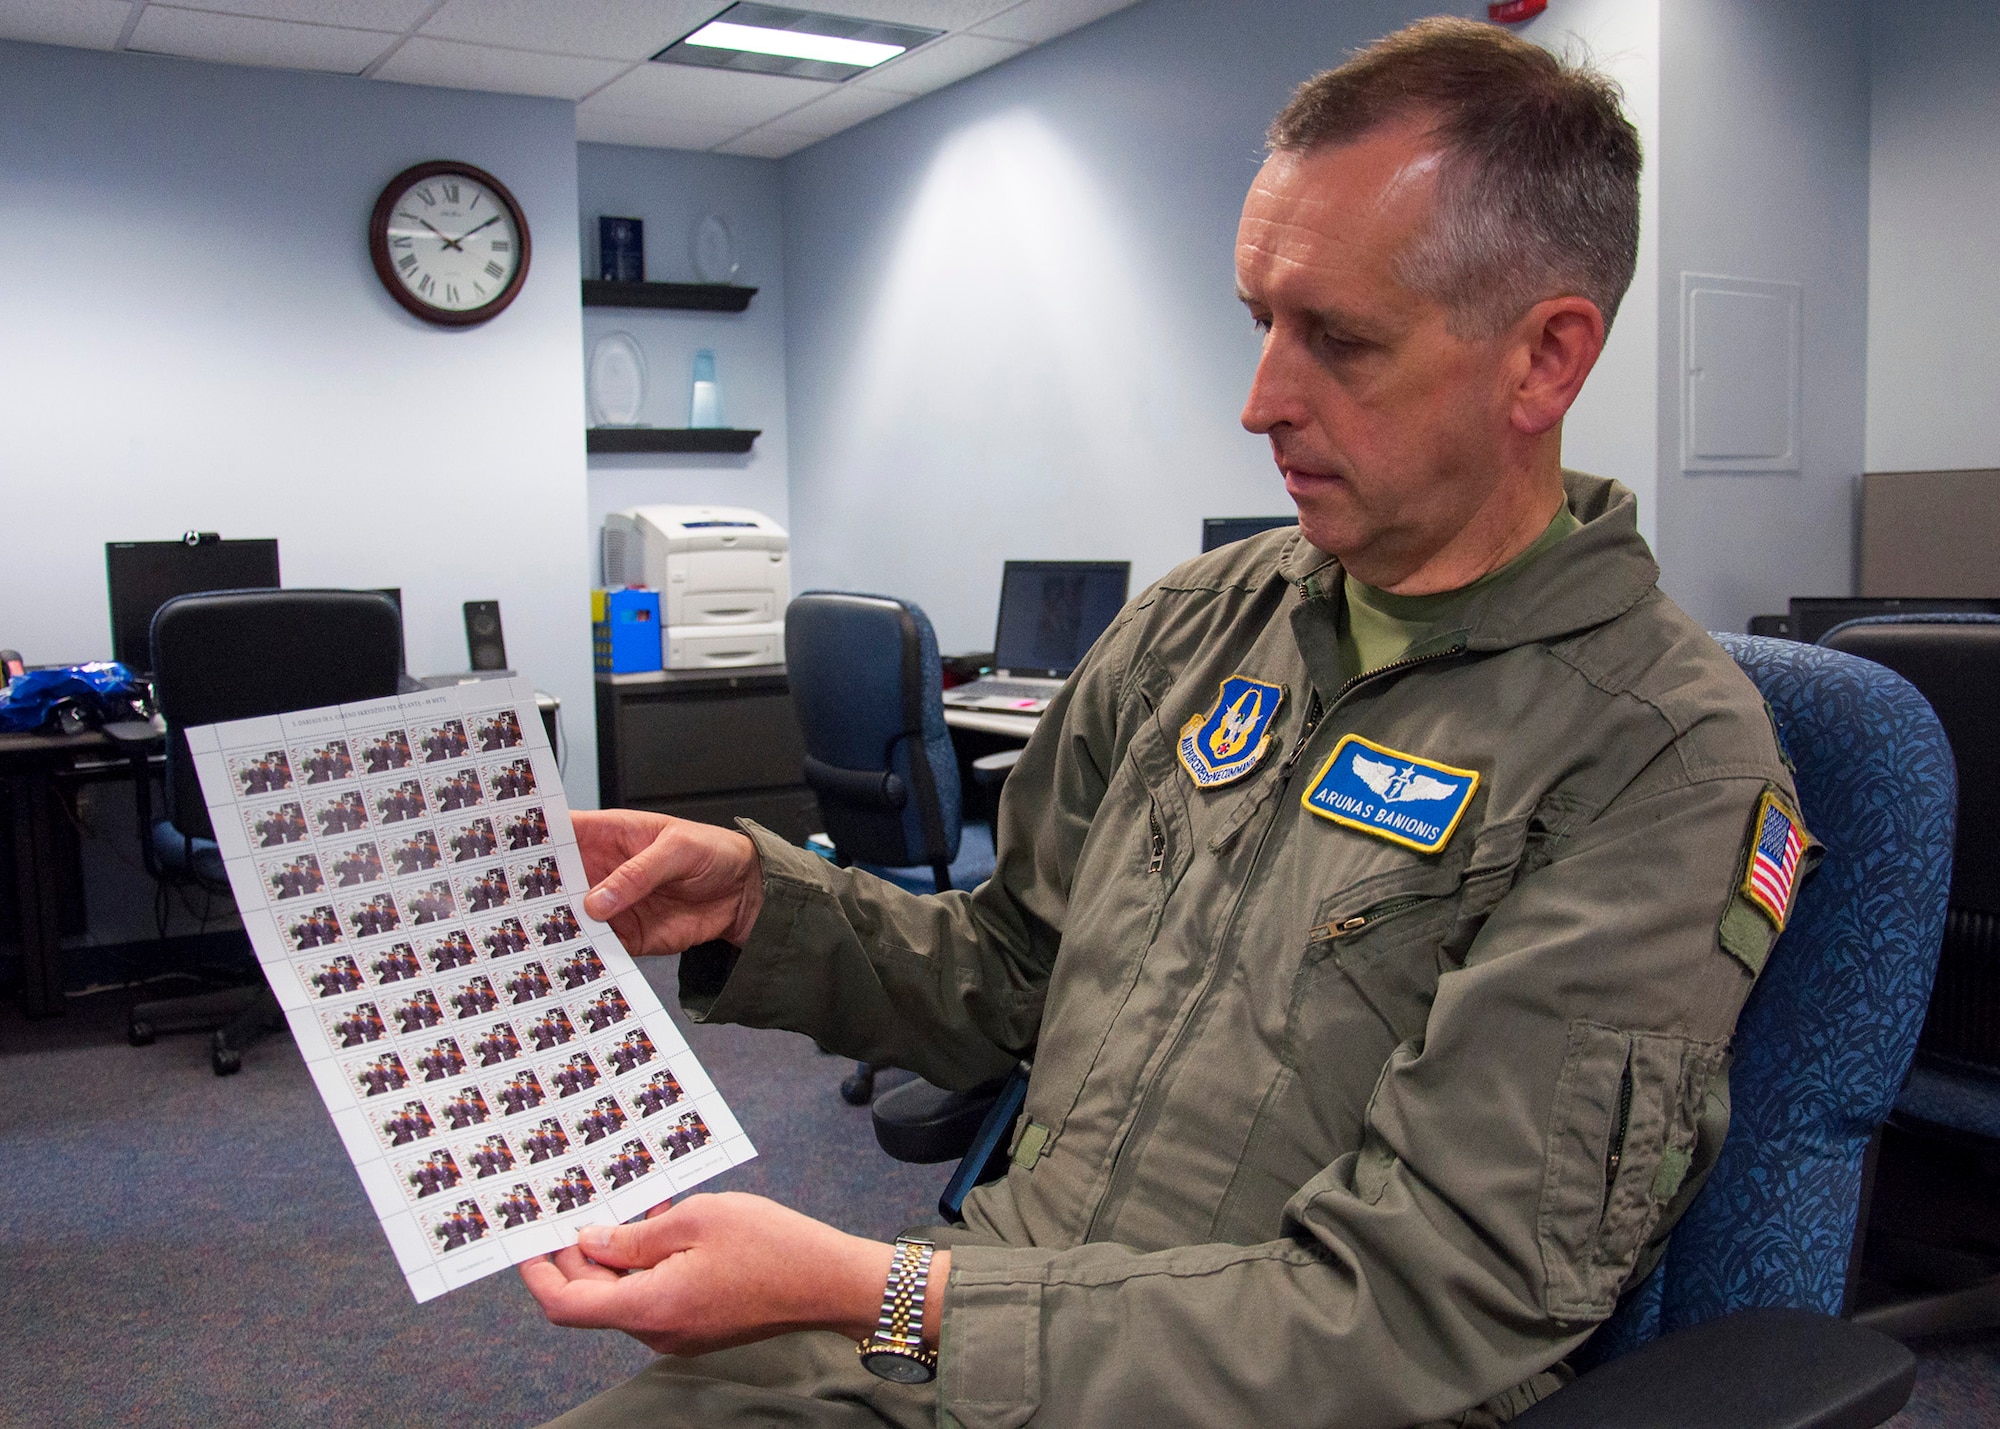 Lt. Col. (Dr.) Arunas Banionis, a flight surgeon with the 446th Aerospace Medicine Squadron, displays a page of Lithuanian stamps, Aug. 11. Banionis created the design, which placed first in the Lithuanian Post Postage Stamps Design Contest in May. July 20 marked the 80th Anniversary of the Flight of Darius and Girėnas, the first transatlantic flight flown by Lithuanian-born pilots, which was his inspiration for the design. Banionis has a Lithuanian background and grew up with admirations in stamp collecting and aviation. (U.S. Air Force Reserve photo/Master Sgt. Jake Chappelle)